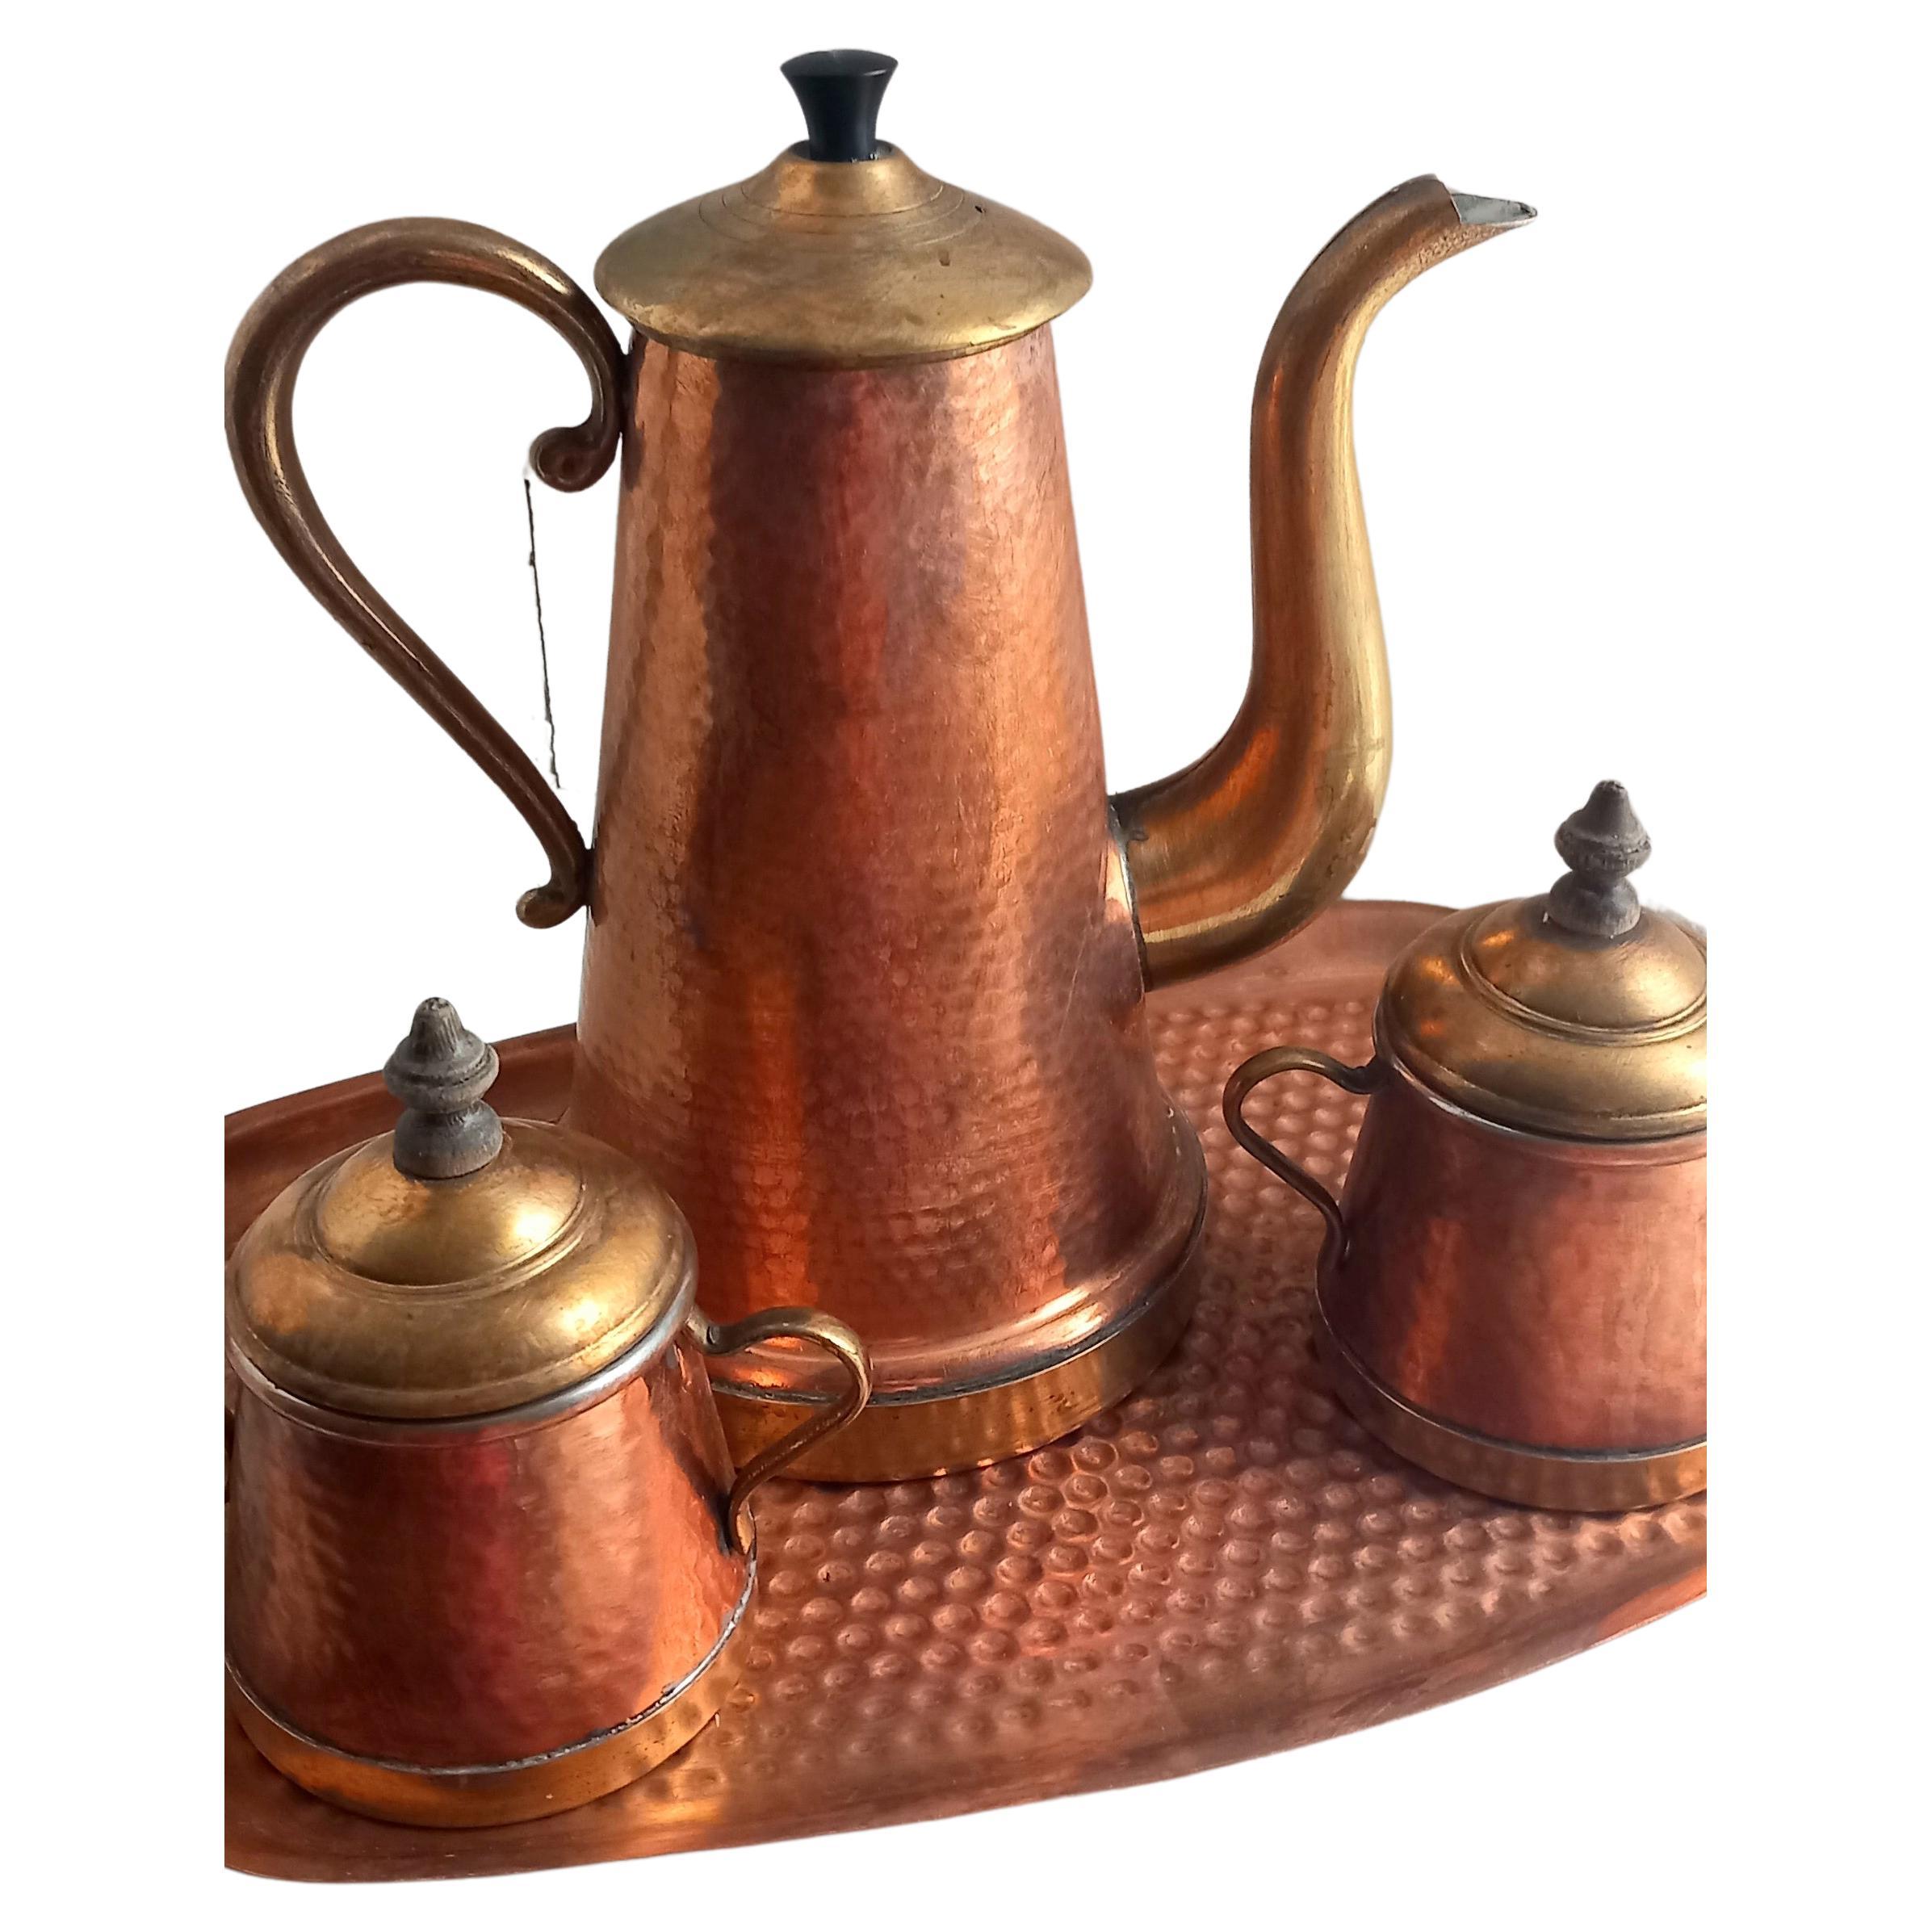 Copper and Brass Coffee or Tea set, Very Decorative  Early 20th Century